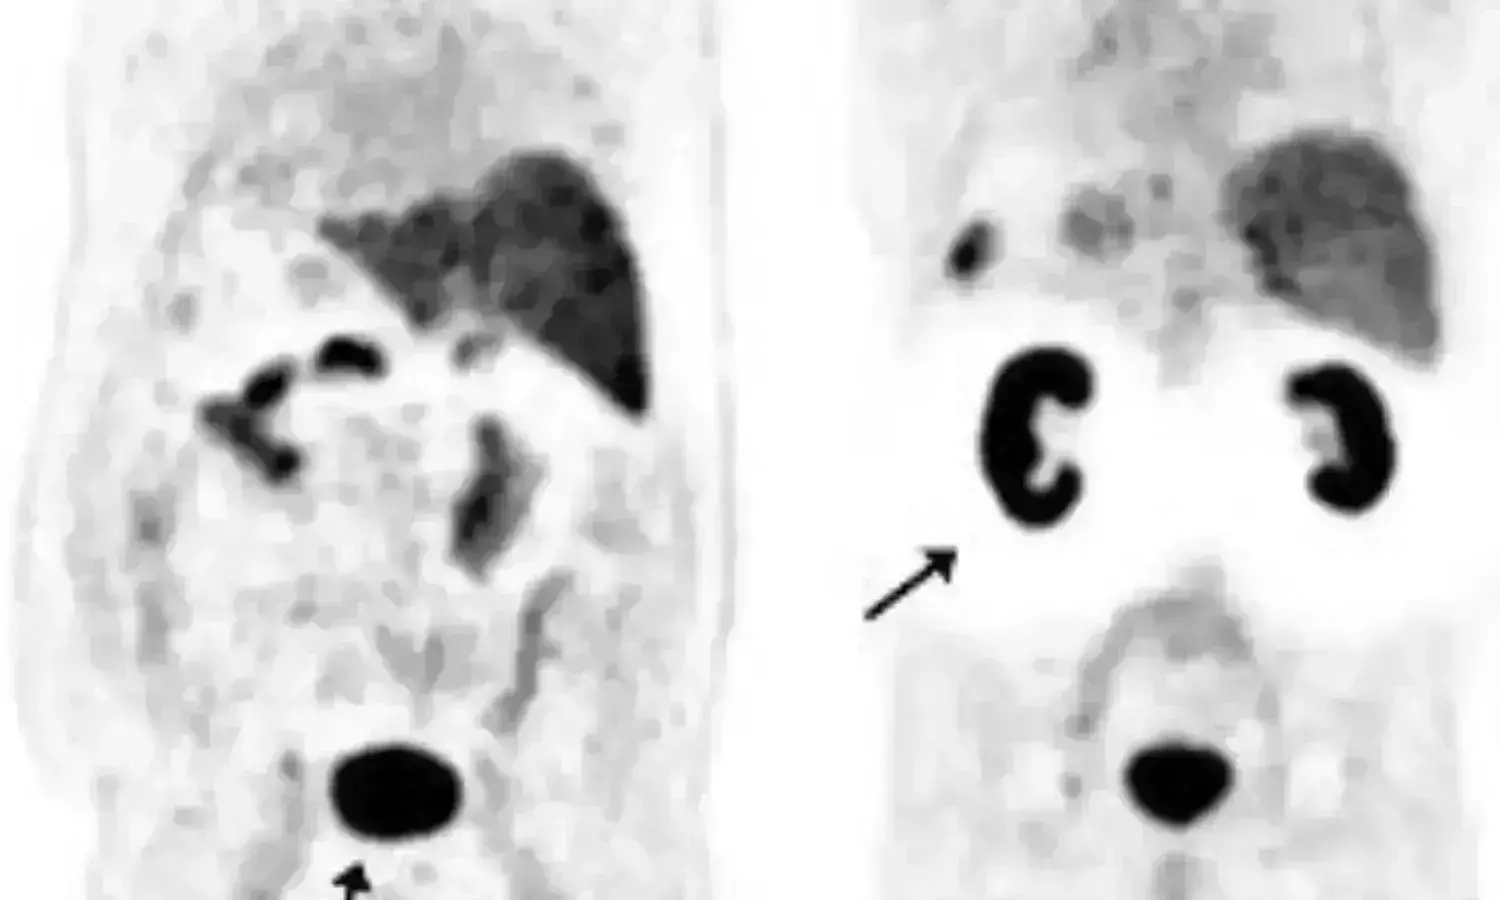 Increased PSMA PET/CT may predict chemotherapy response in metastatic prostate cancer: Study